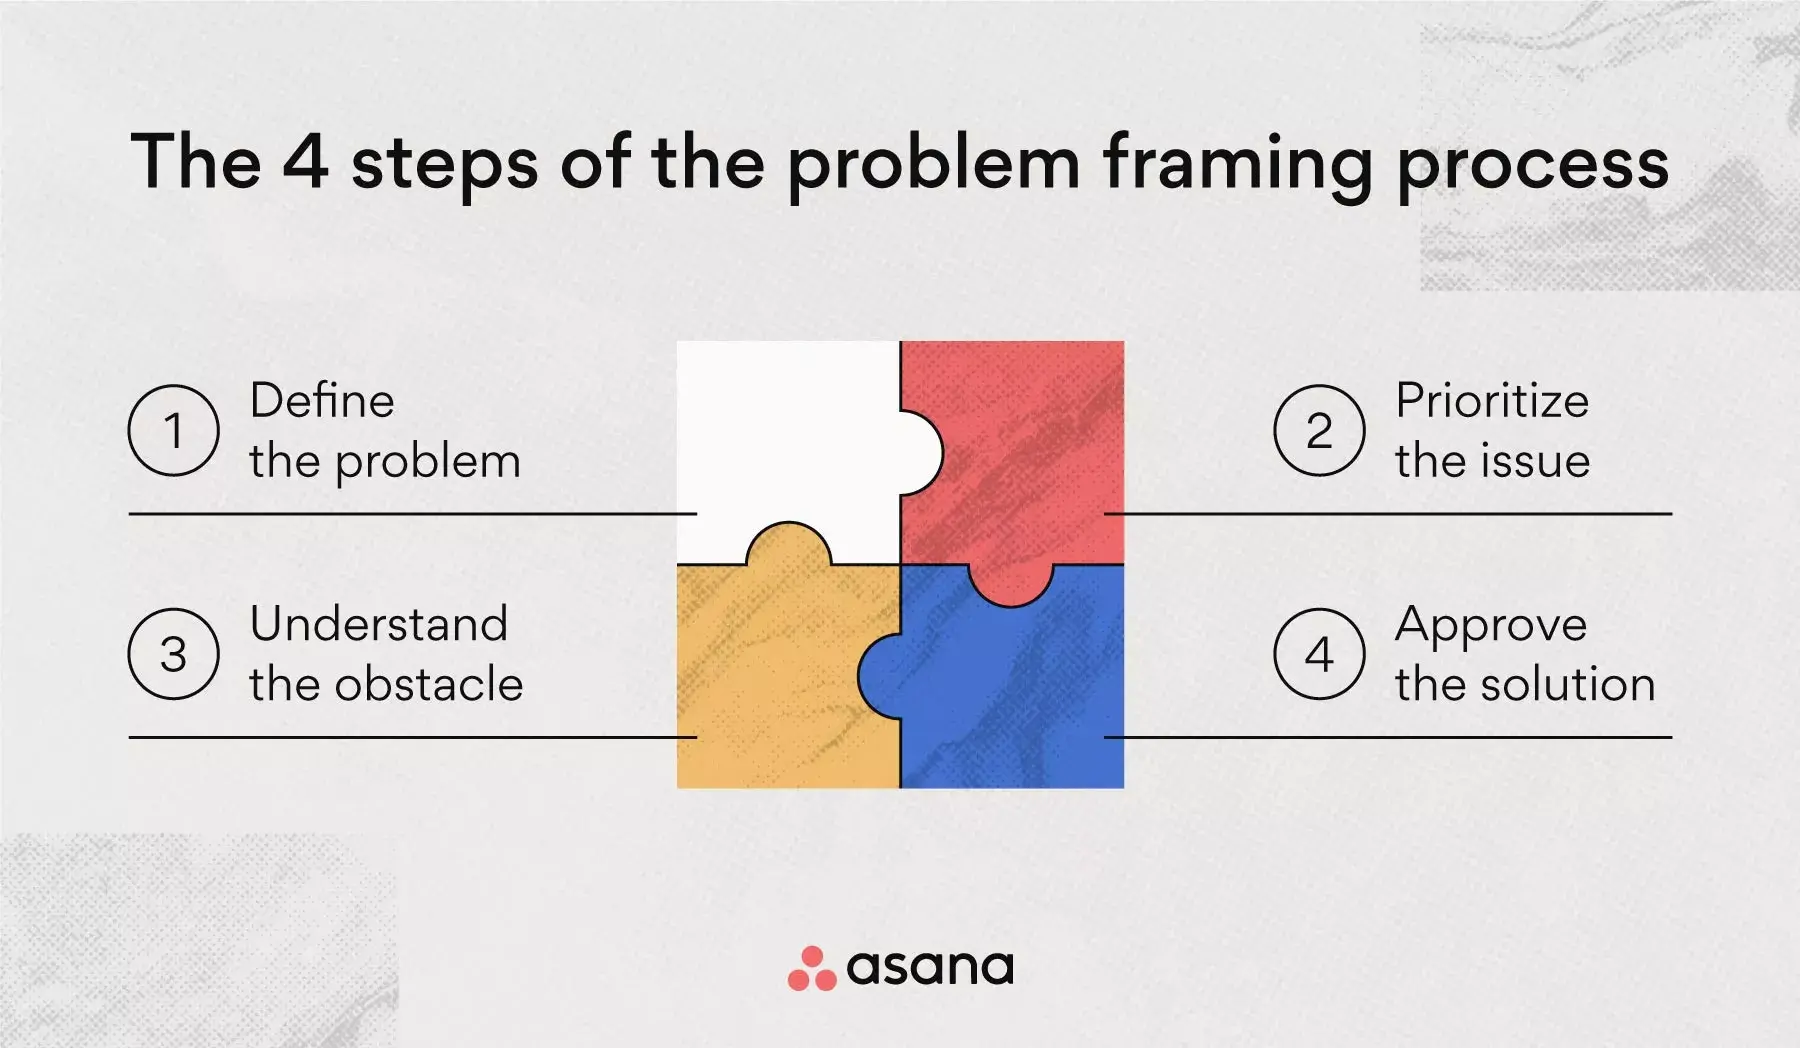 The 4 steps of the problem framing process